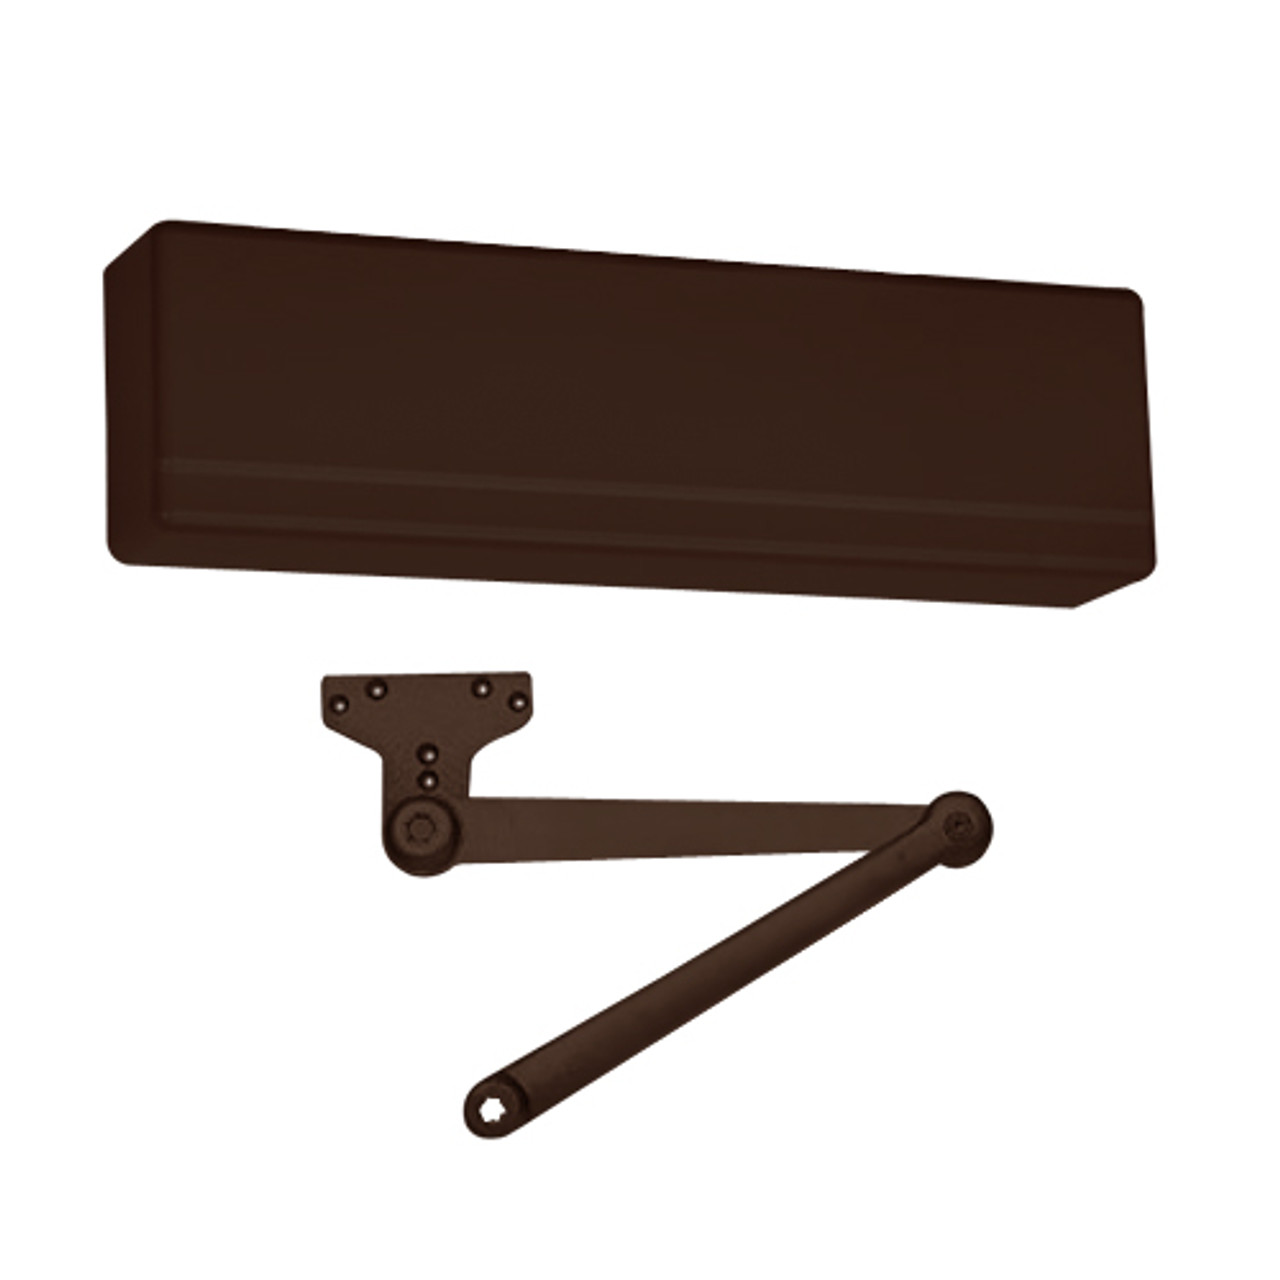 351-PH10-10BE-LH Sargent 351 Series Powerglide Door Closer with Heavy Duty Friction Hold Open Parallel Arm in Dark Oxidized Satin Bronze